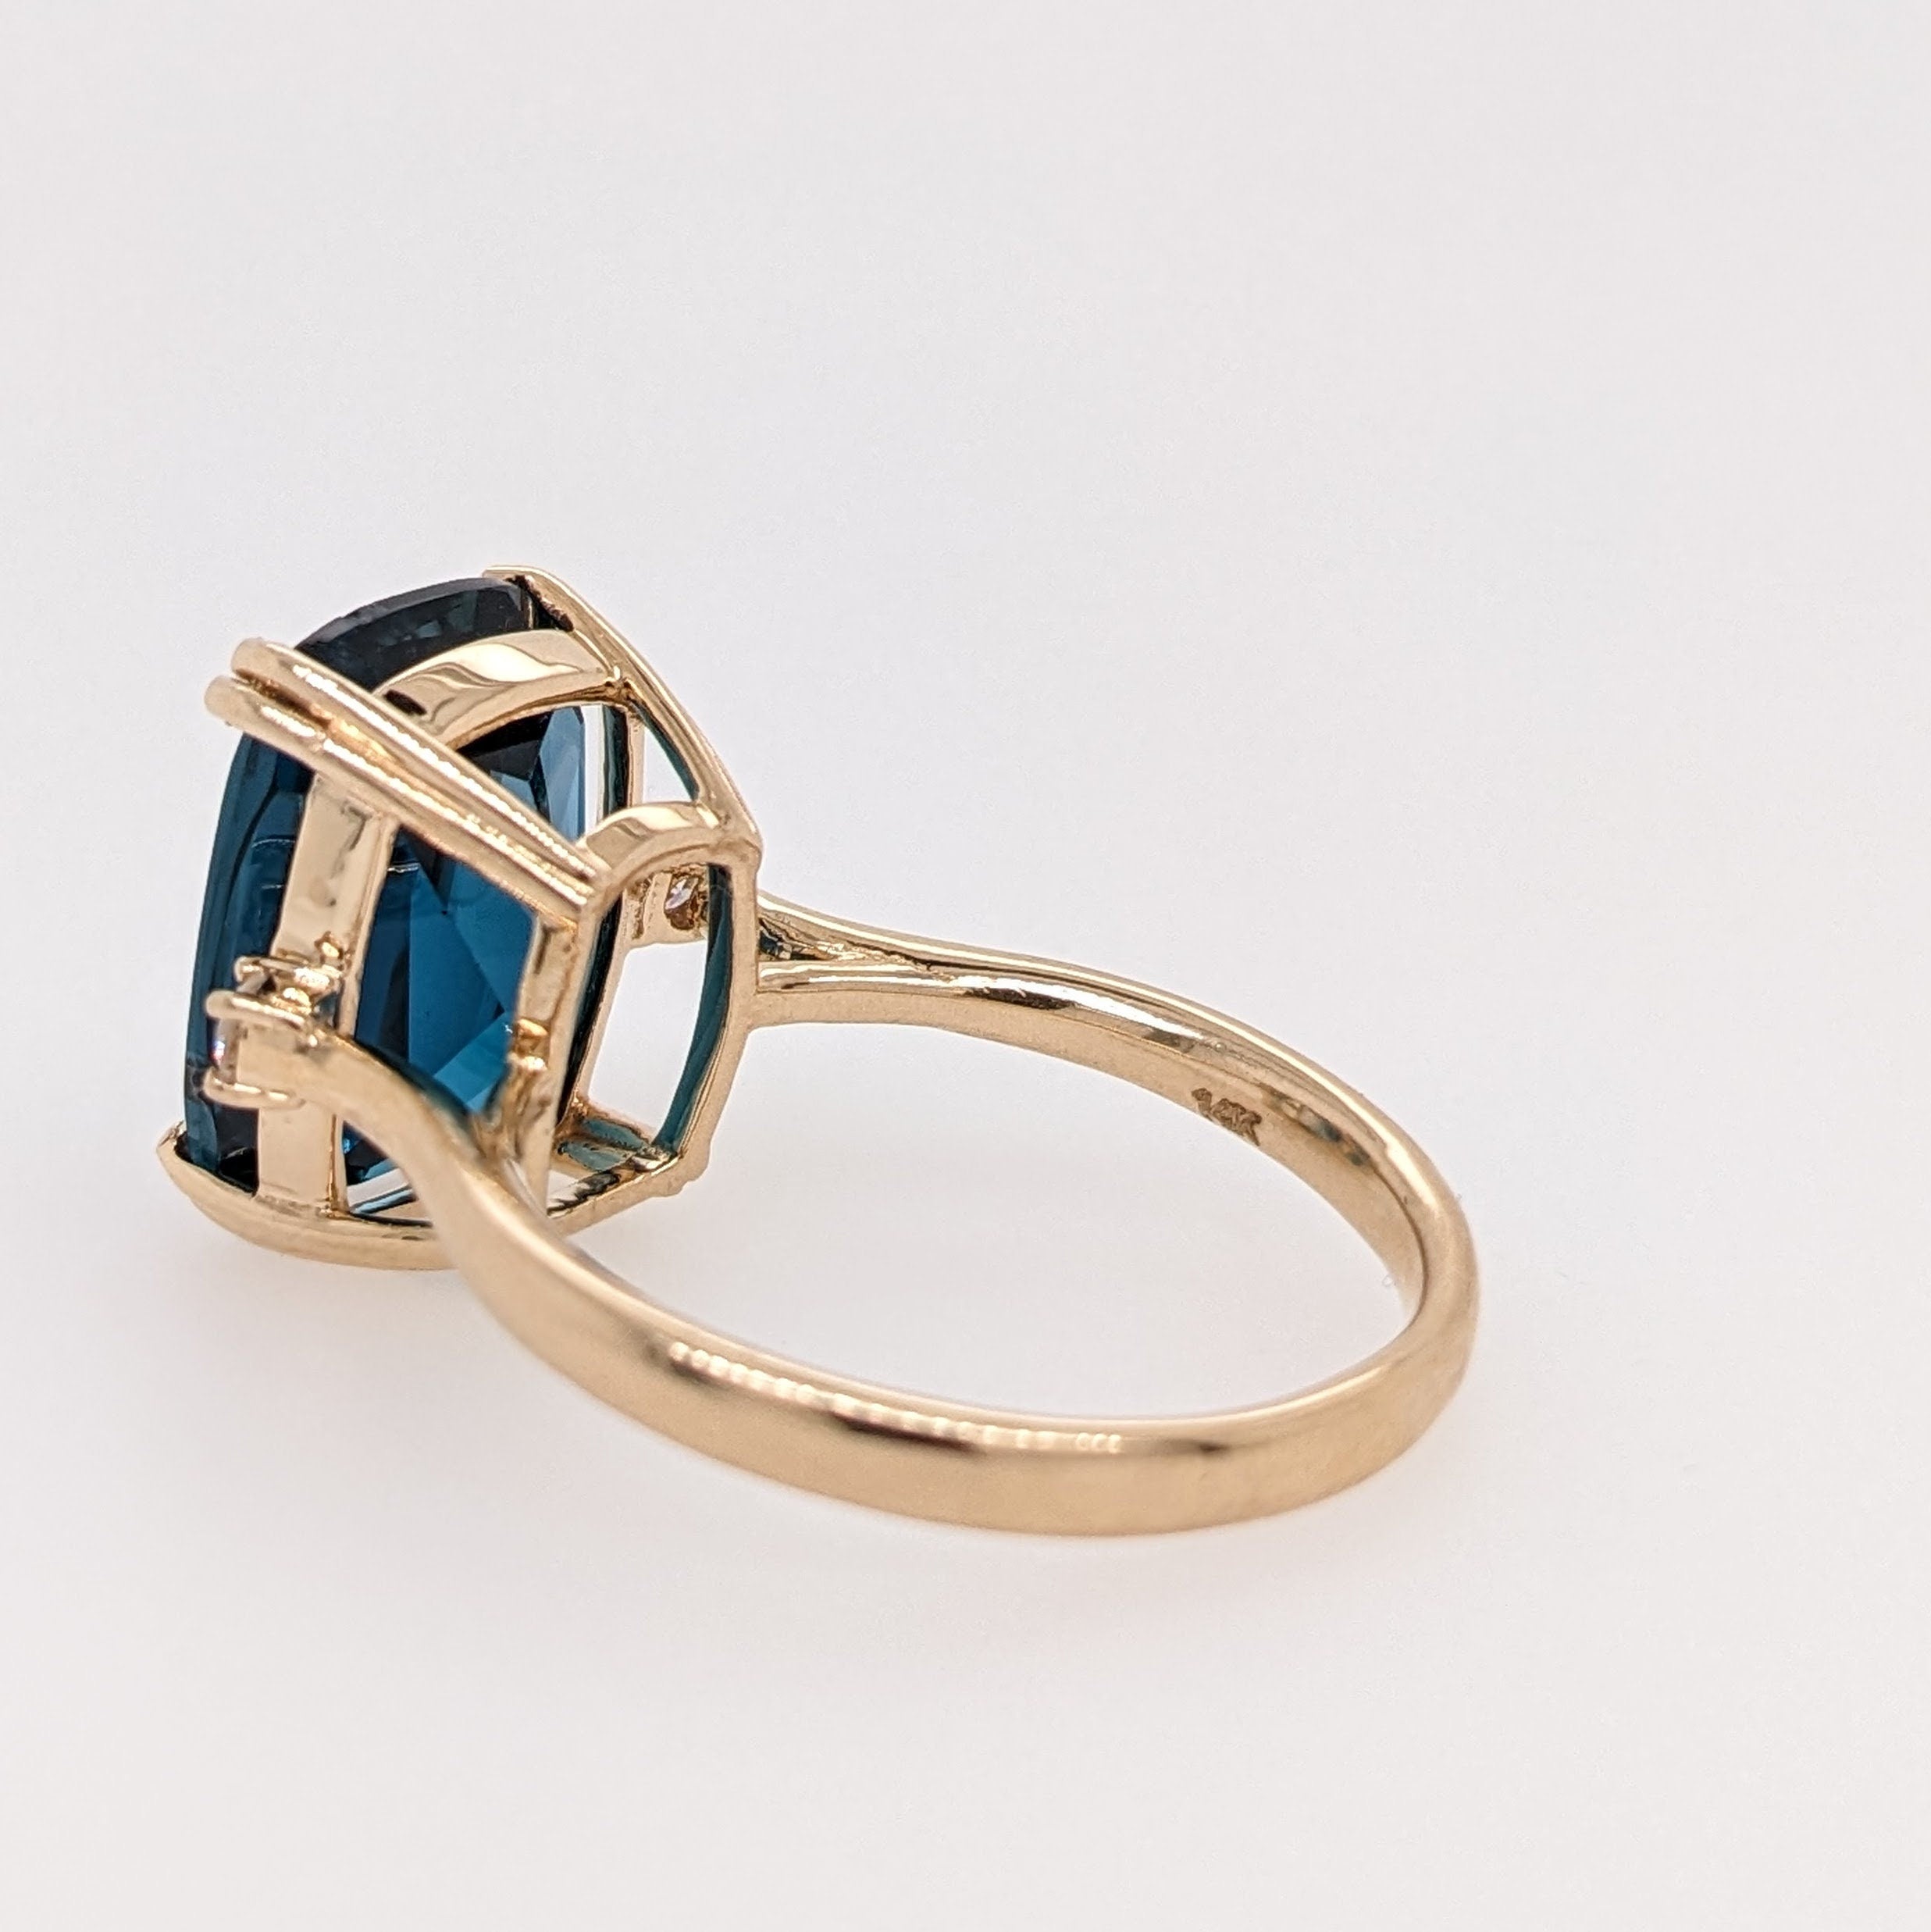 Stunning London Blue Topaz Ring in Solid 14K Yellow Gold w Diamond Accents | Cushion 14x20mm | Solitaire Topaz Ring | November Birthstone